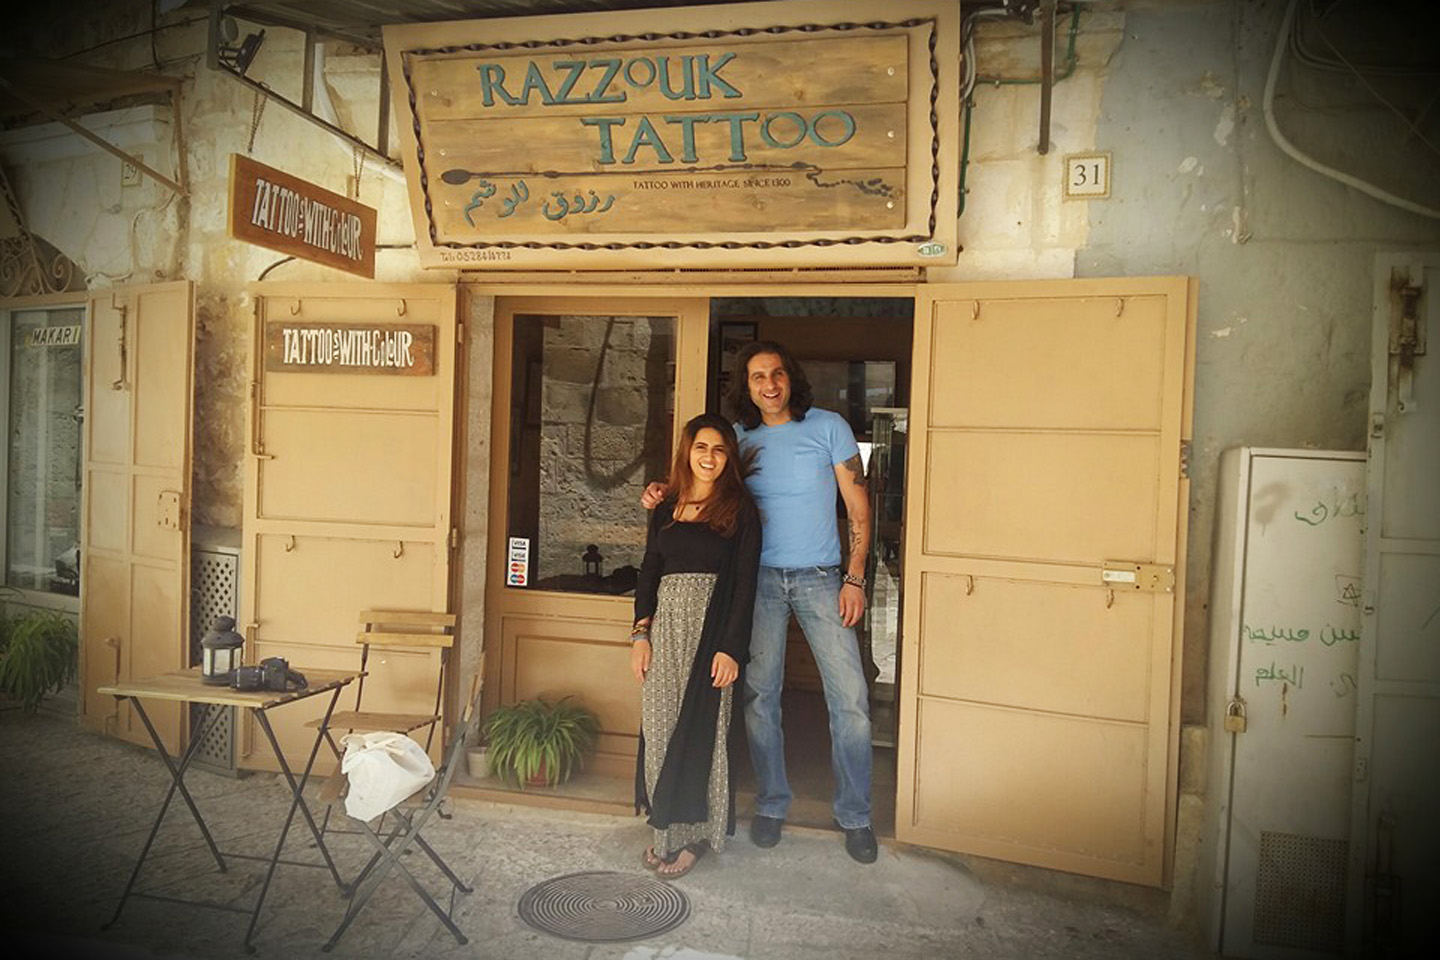 The Old City is home to the Razzouk’s tattoo shop. A sign on the door identifies it unequivocally: tattoo with heritage since 1300. 